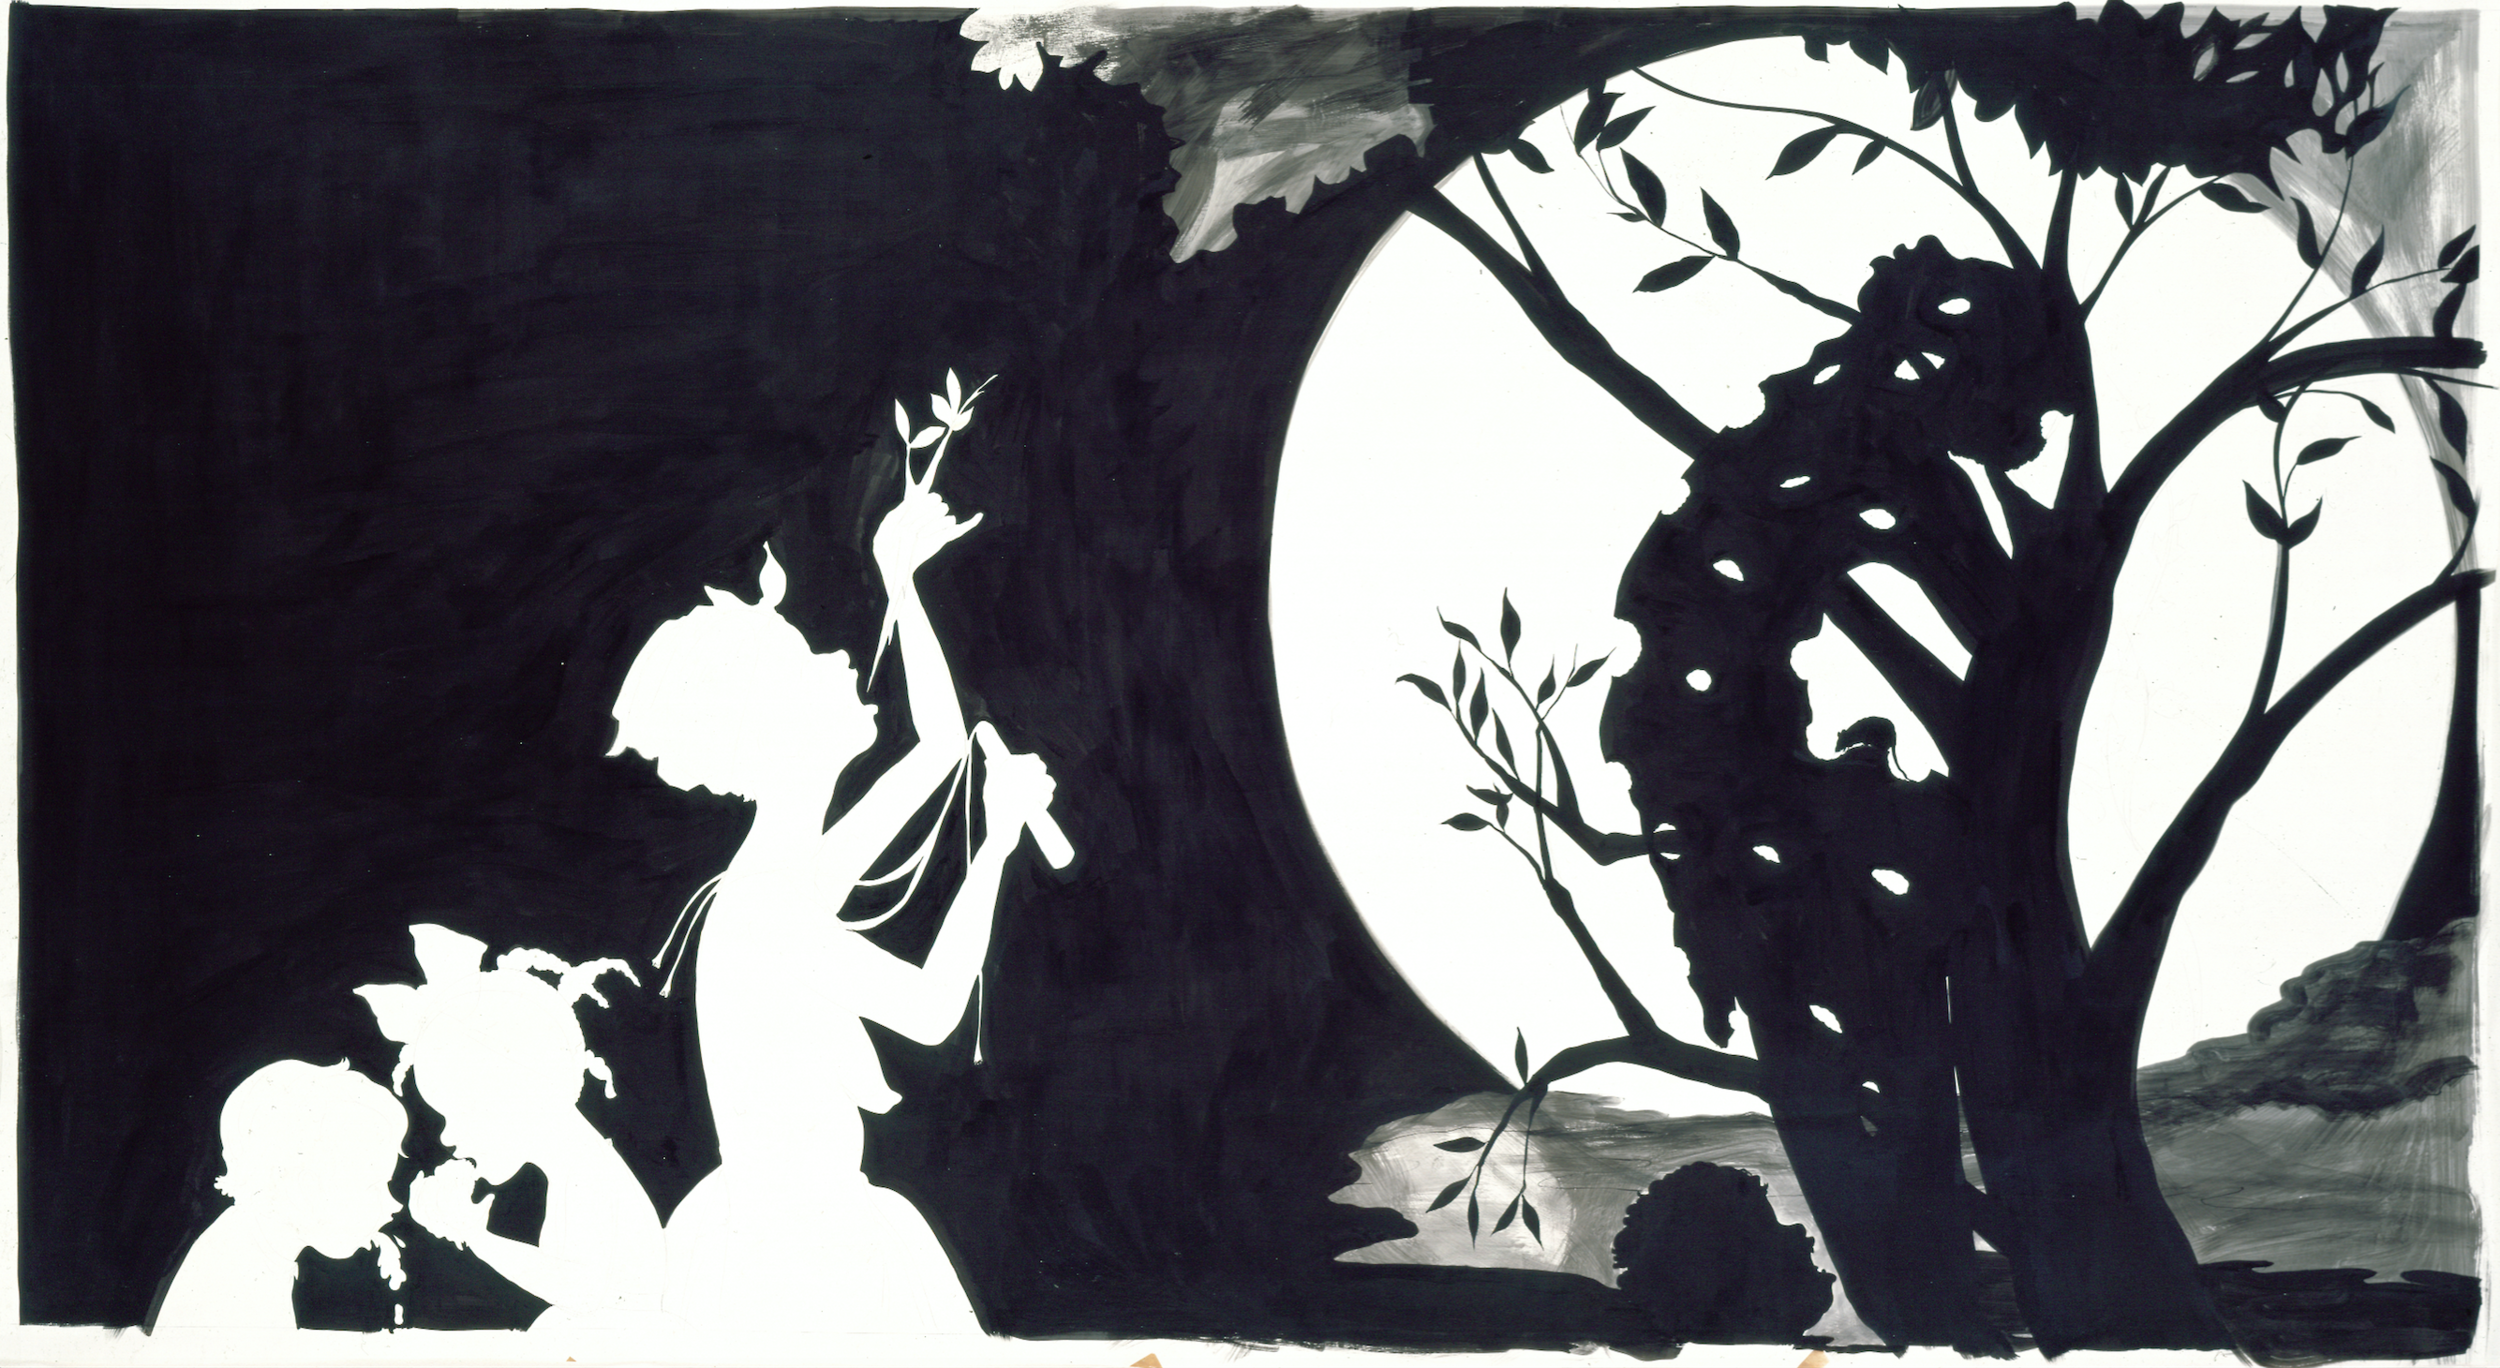 Kara Walker,Untitled, 1998. Gouache and pencil on paper. Walker is a grant recipient of the Joan Mitchell Foundation.